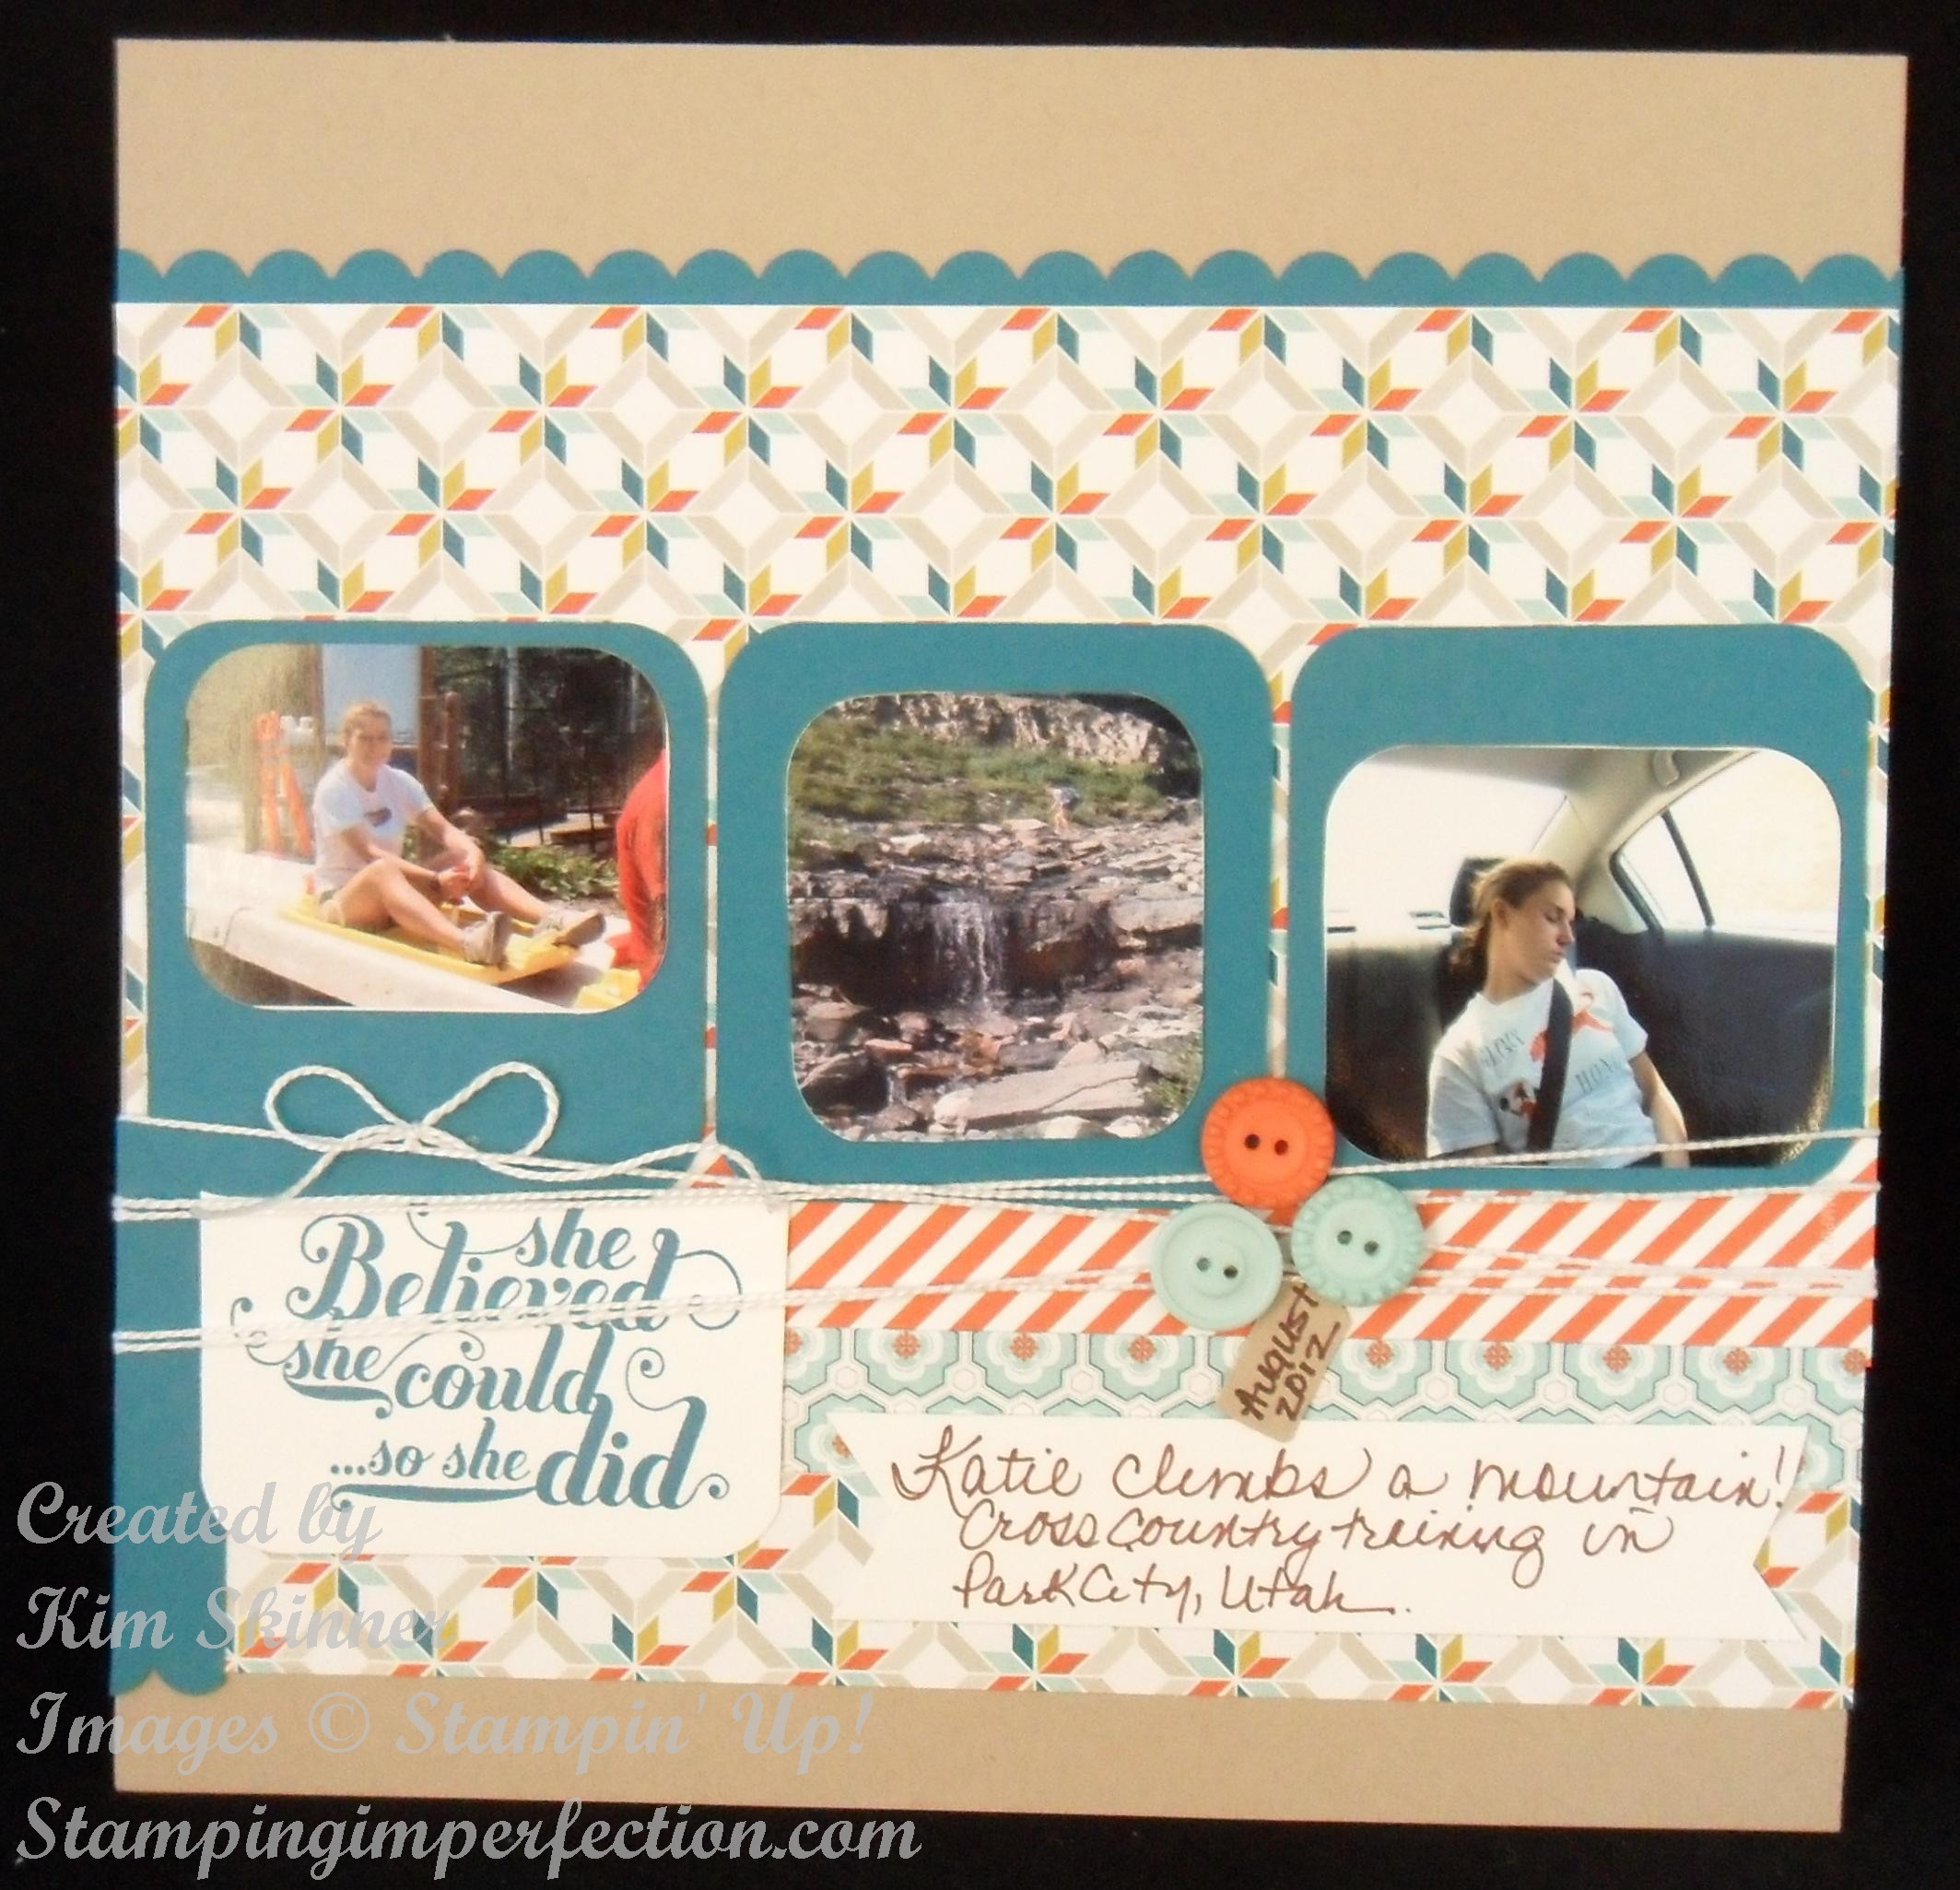 2 Stampin' Up! Scrapbook Pages Made From 1 Sketch! – Stamping Imperfection